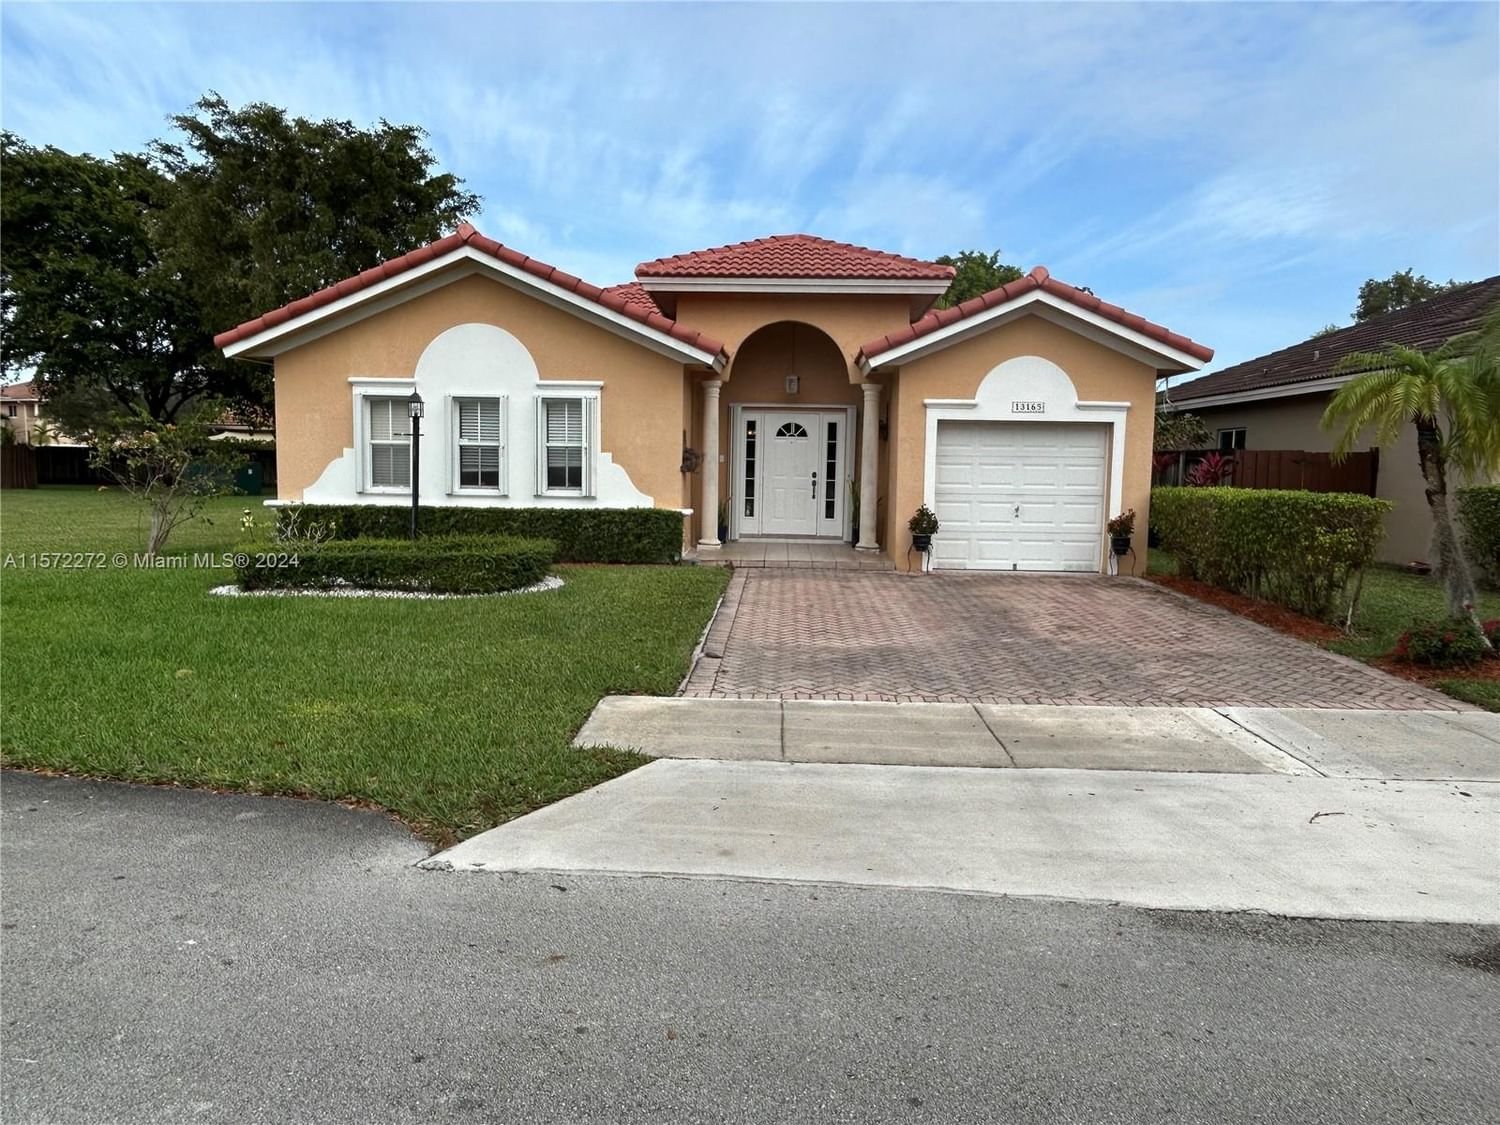 Real estate property located at 13165 142 TER, Miami-Dade County, TWIN LAKES SHORES, Miami, FL